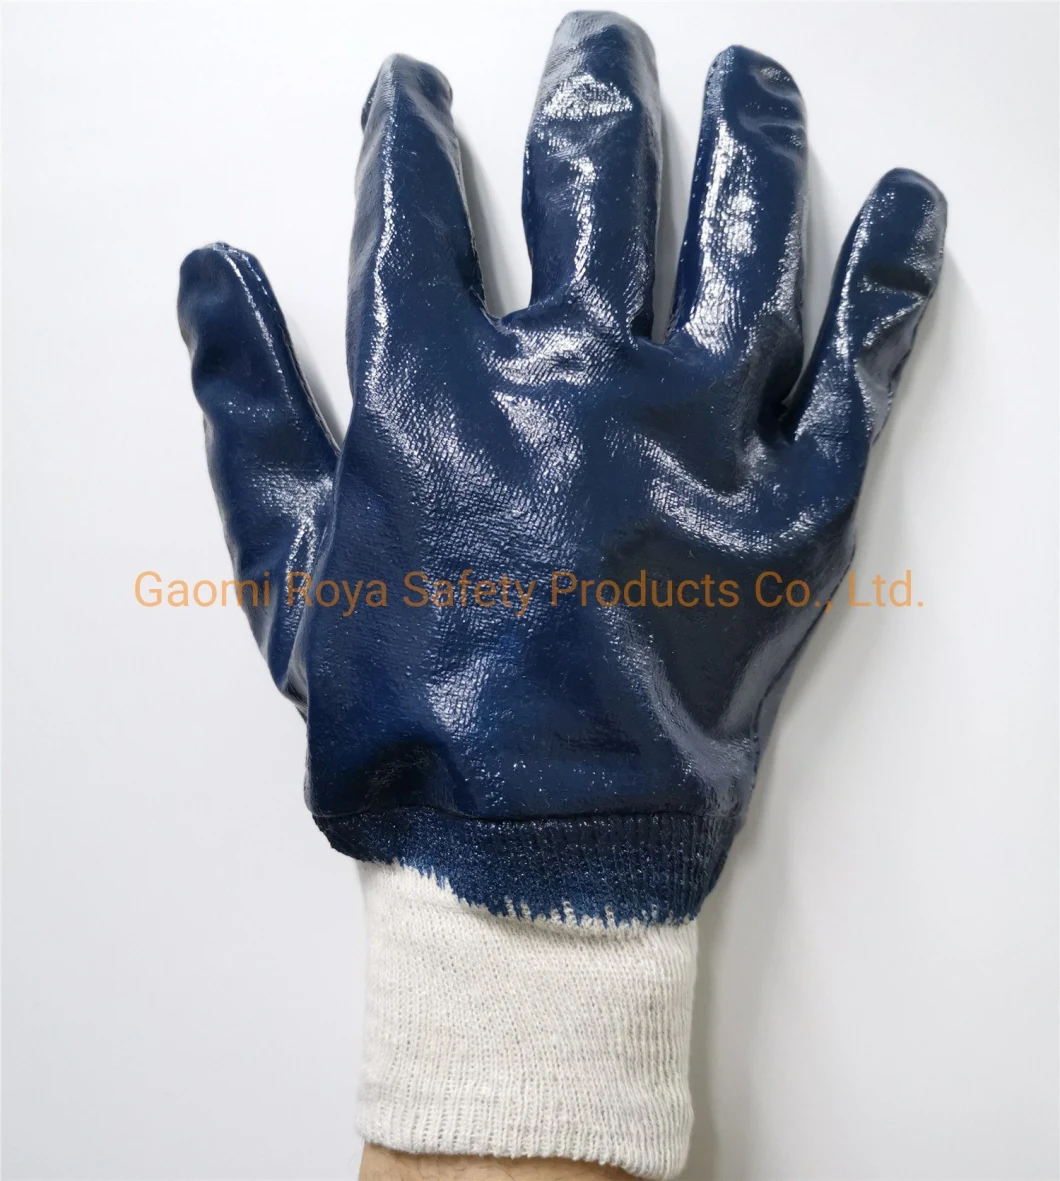 Cotton Shell Nitrile Safety Gloves Heavy Duty NBR Gloves Anti Oil Industrial Work Gloves